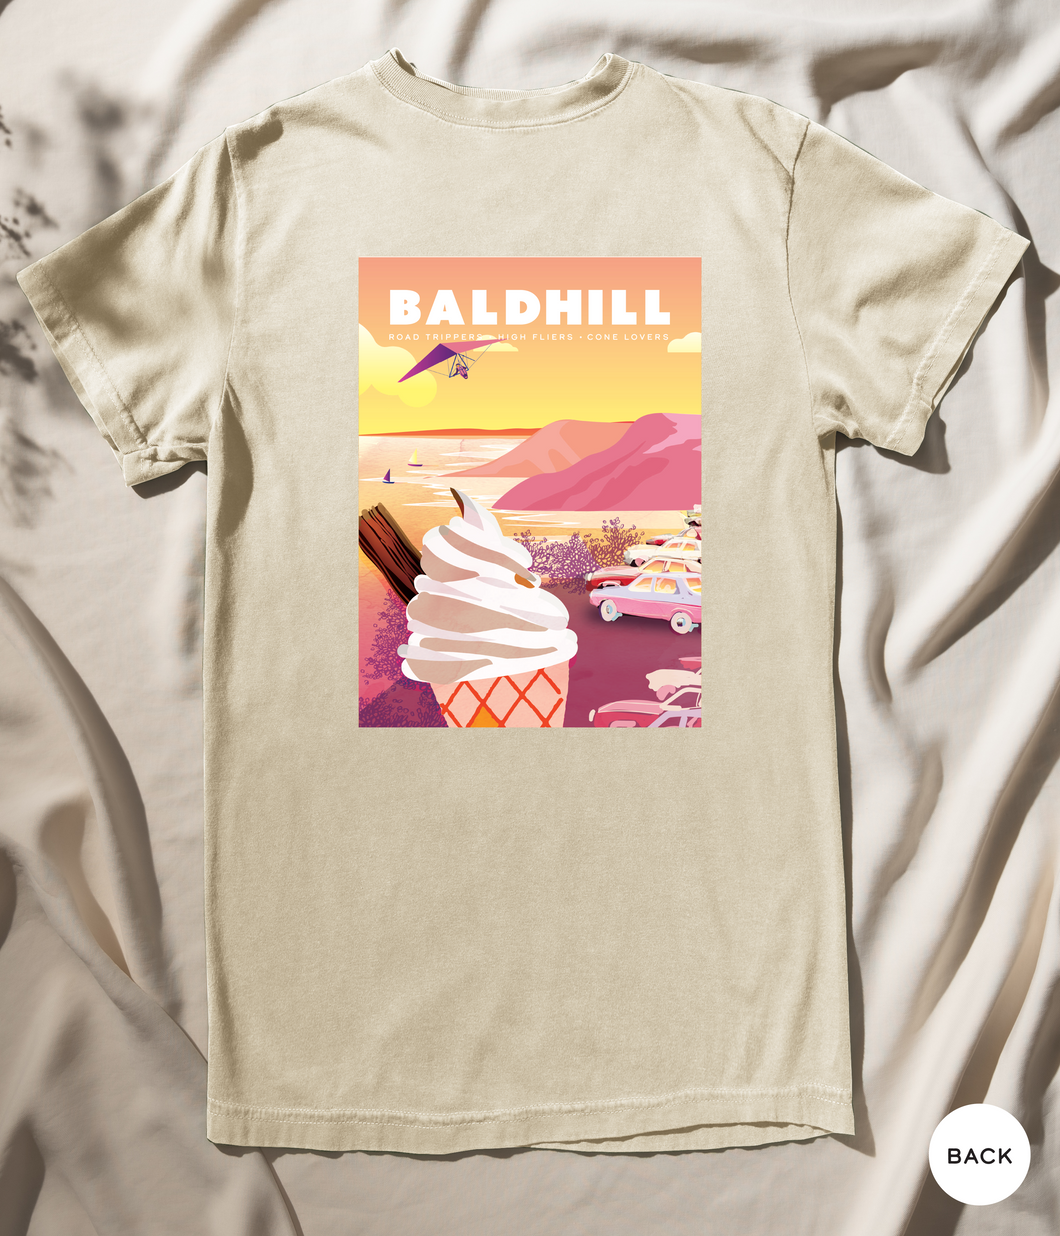 ANYWHEN BALD HILL T-SHIRT PRE-ORDER FOR CHRISTMAS